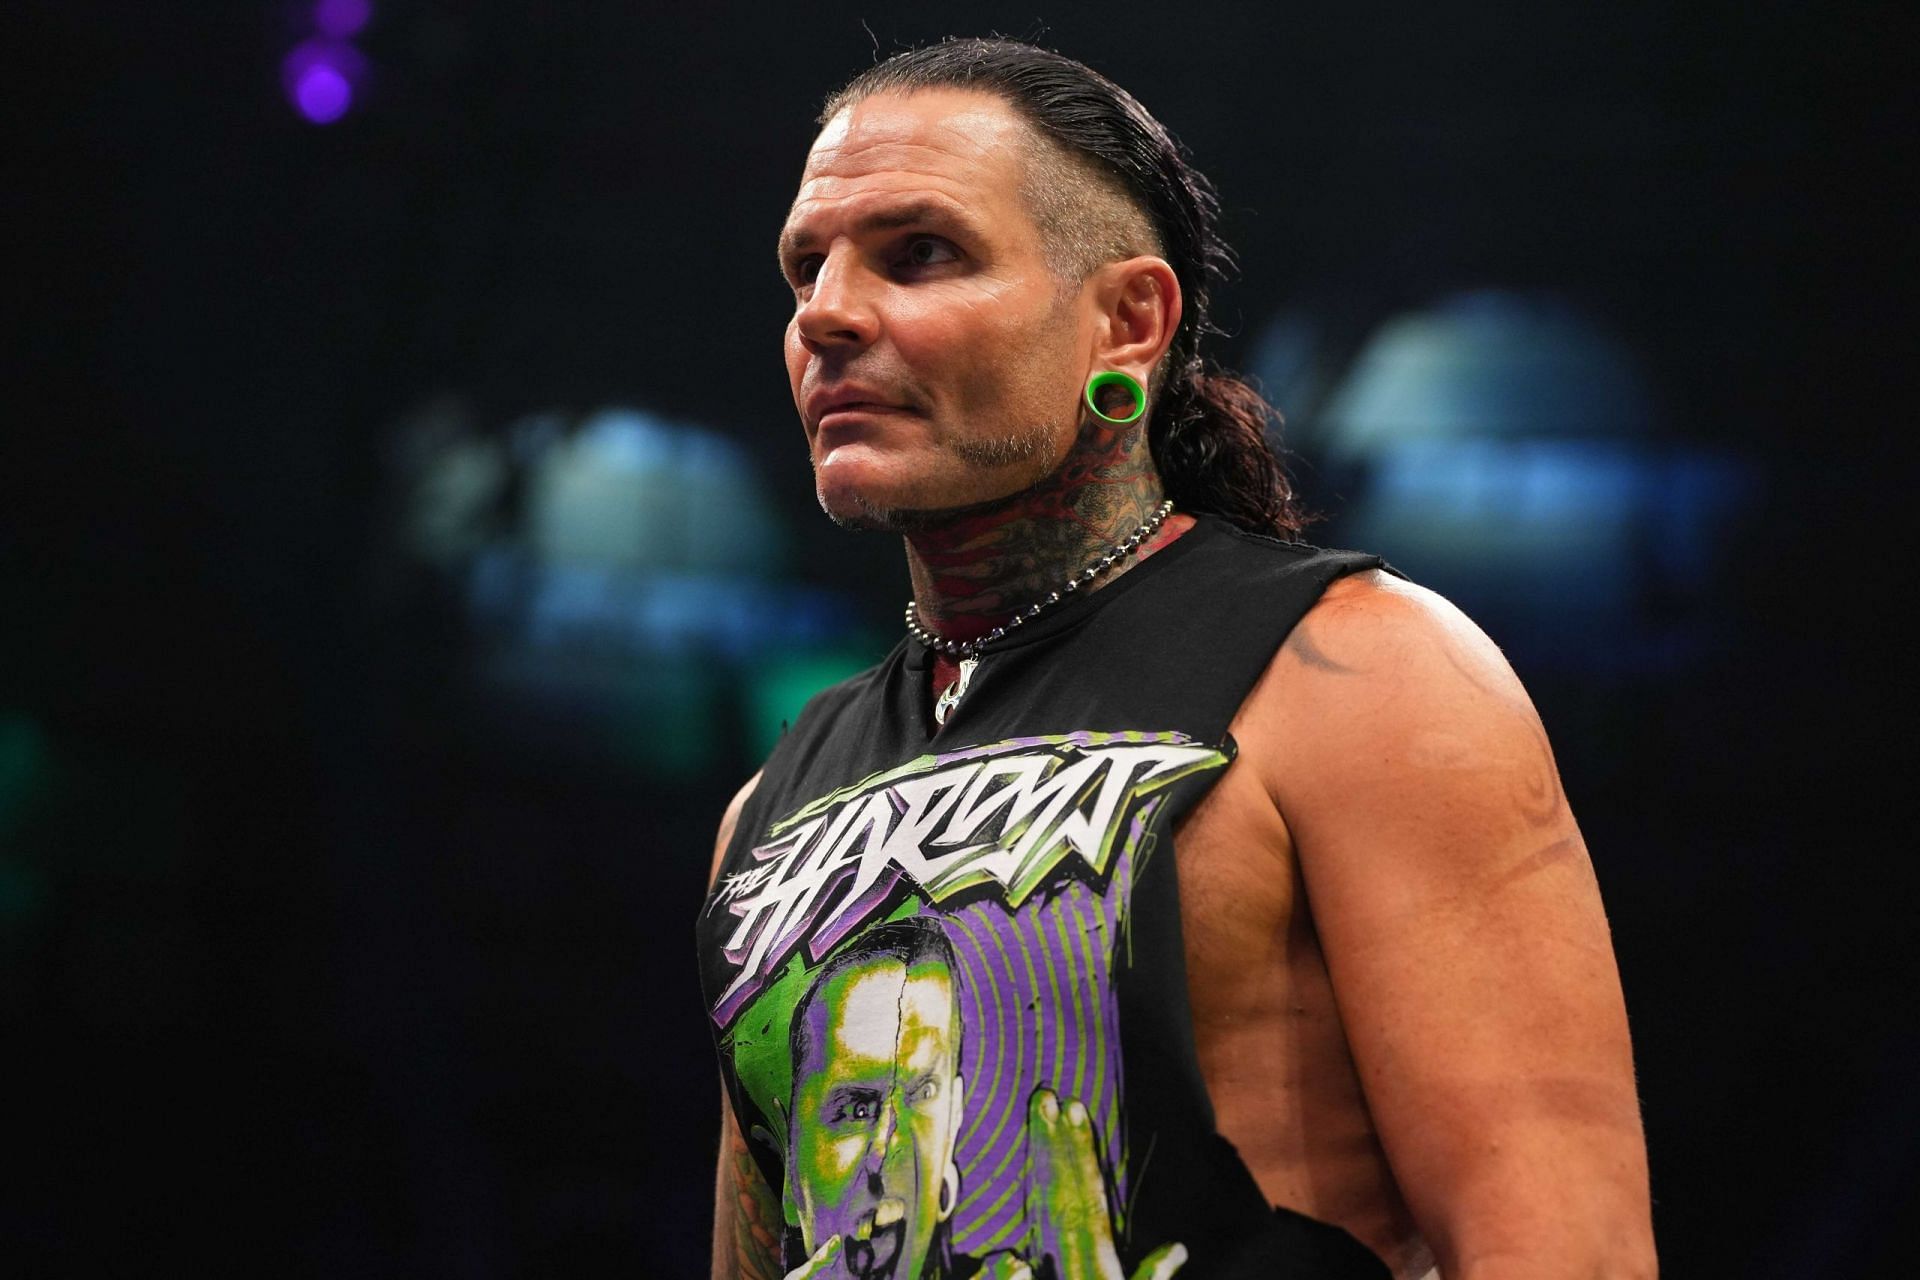 Jeff Hardy joined AEW earlier this year